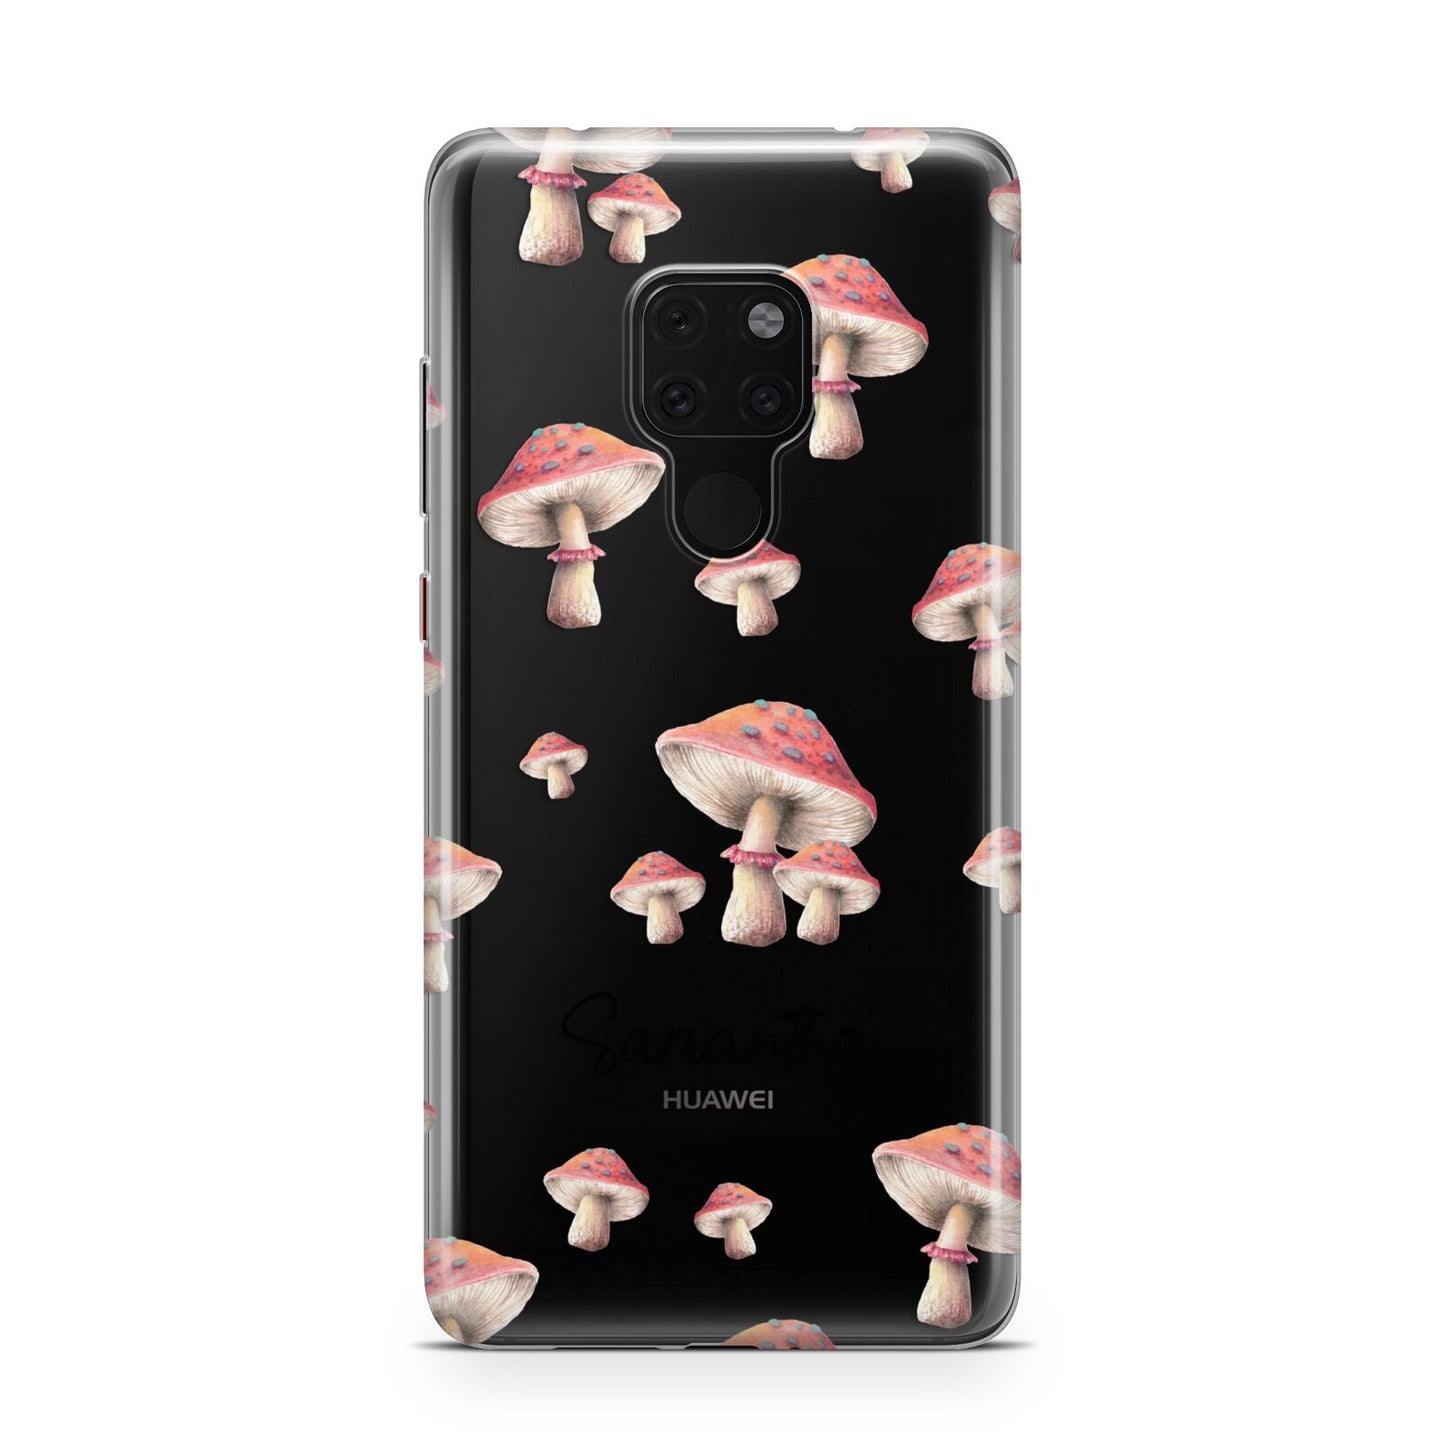 Mushroom Illustrations with Name Huawei Mate 20 Phone Case